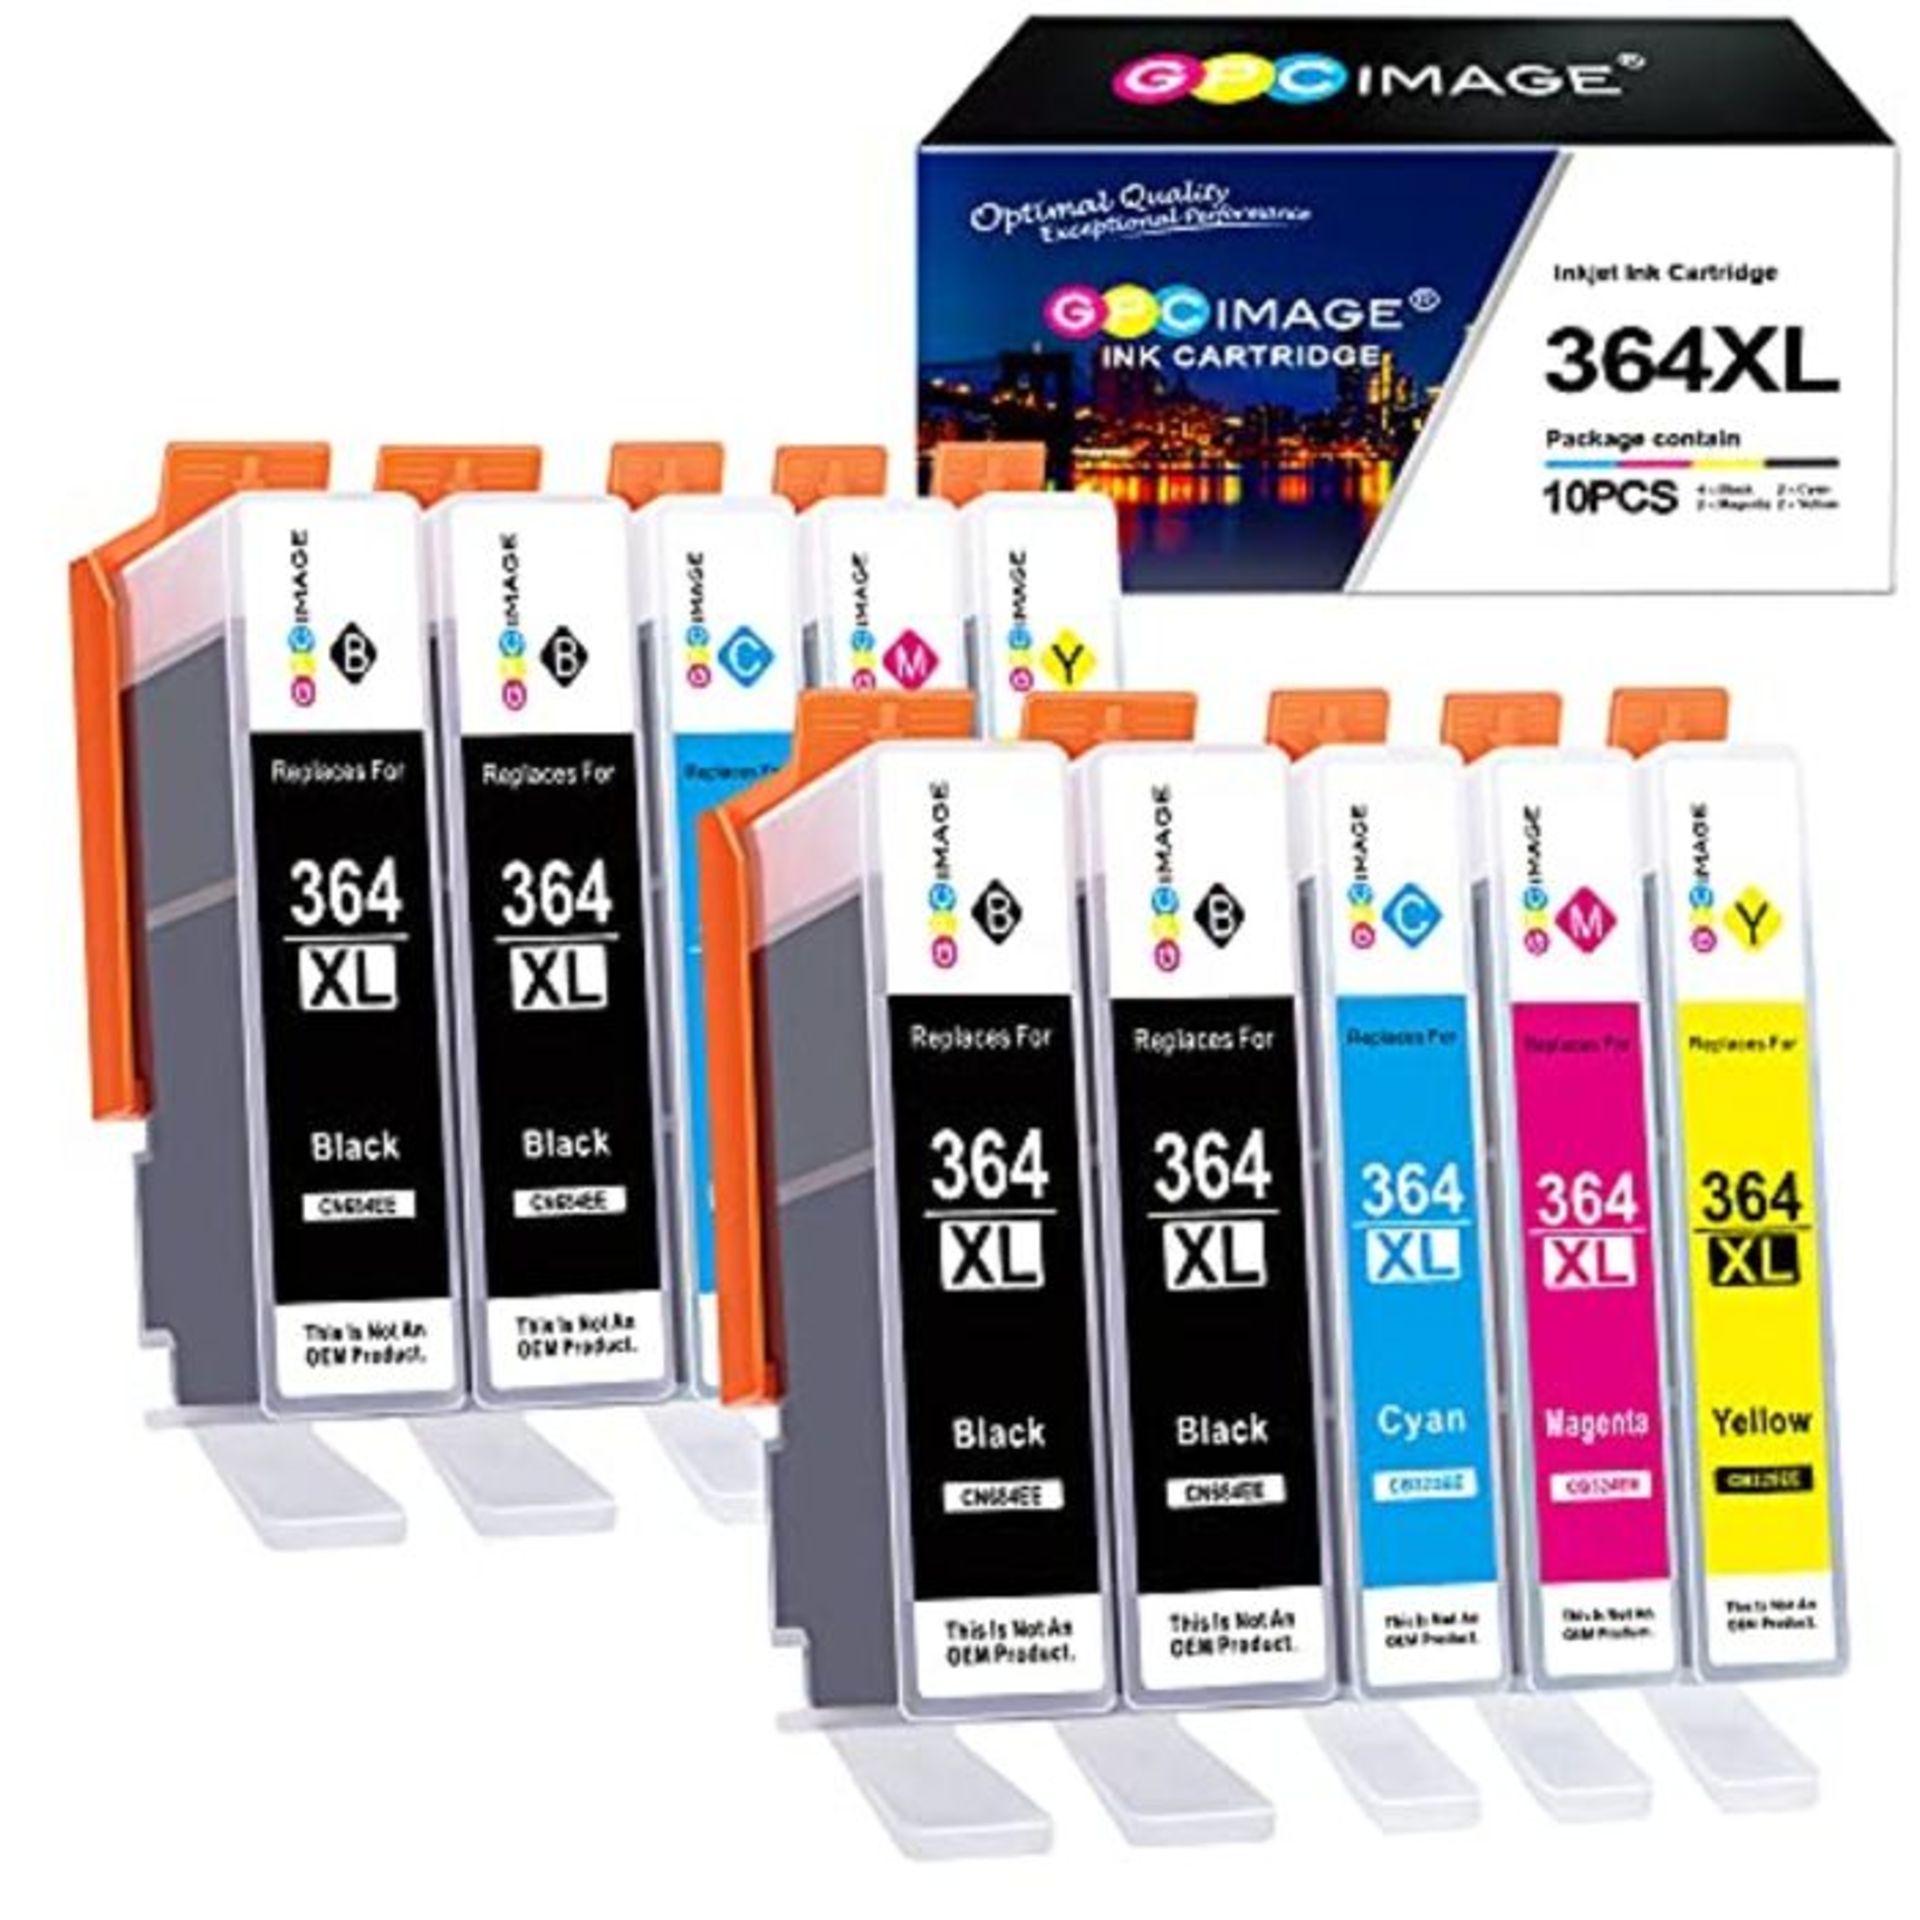 GPC Image Compatible Ink Cartridges Replacement for HP 364XL 364 for Photosmart 5510 5